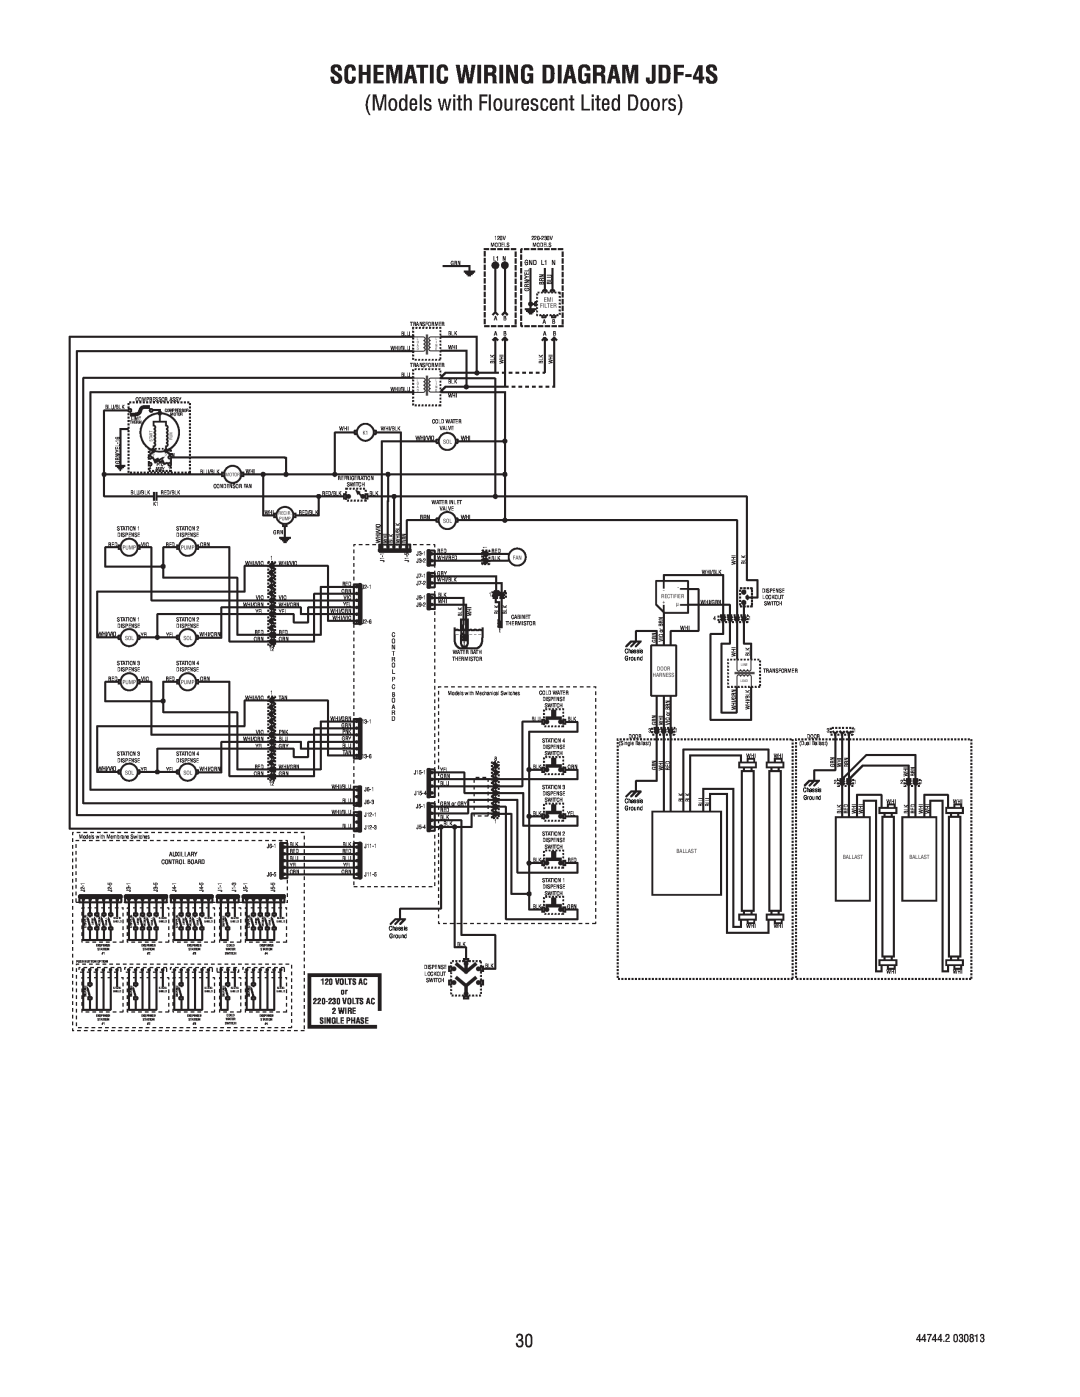 Bunn service manual SCHEMATIC WIRING DIAGRAM JDF-4S, 44744.2, Volts Ac, 220-230VOLTS AC, Wire, Single Phase 